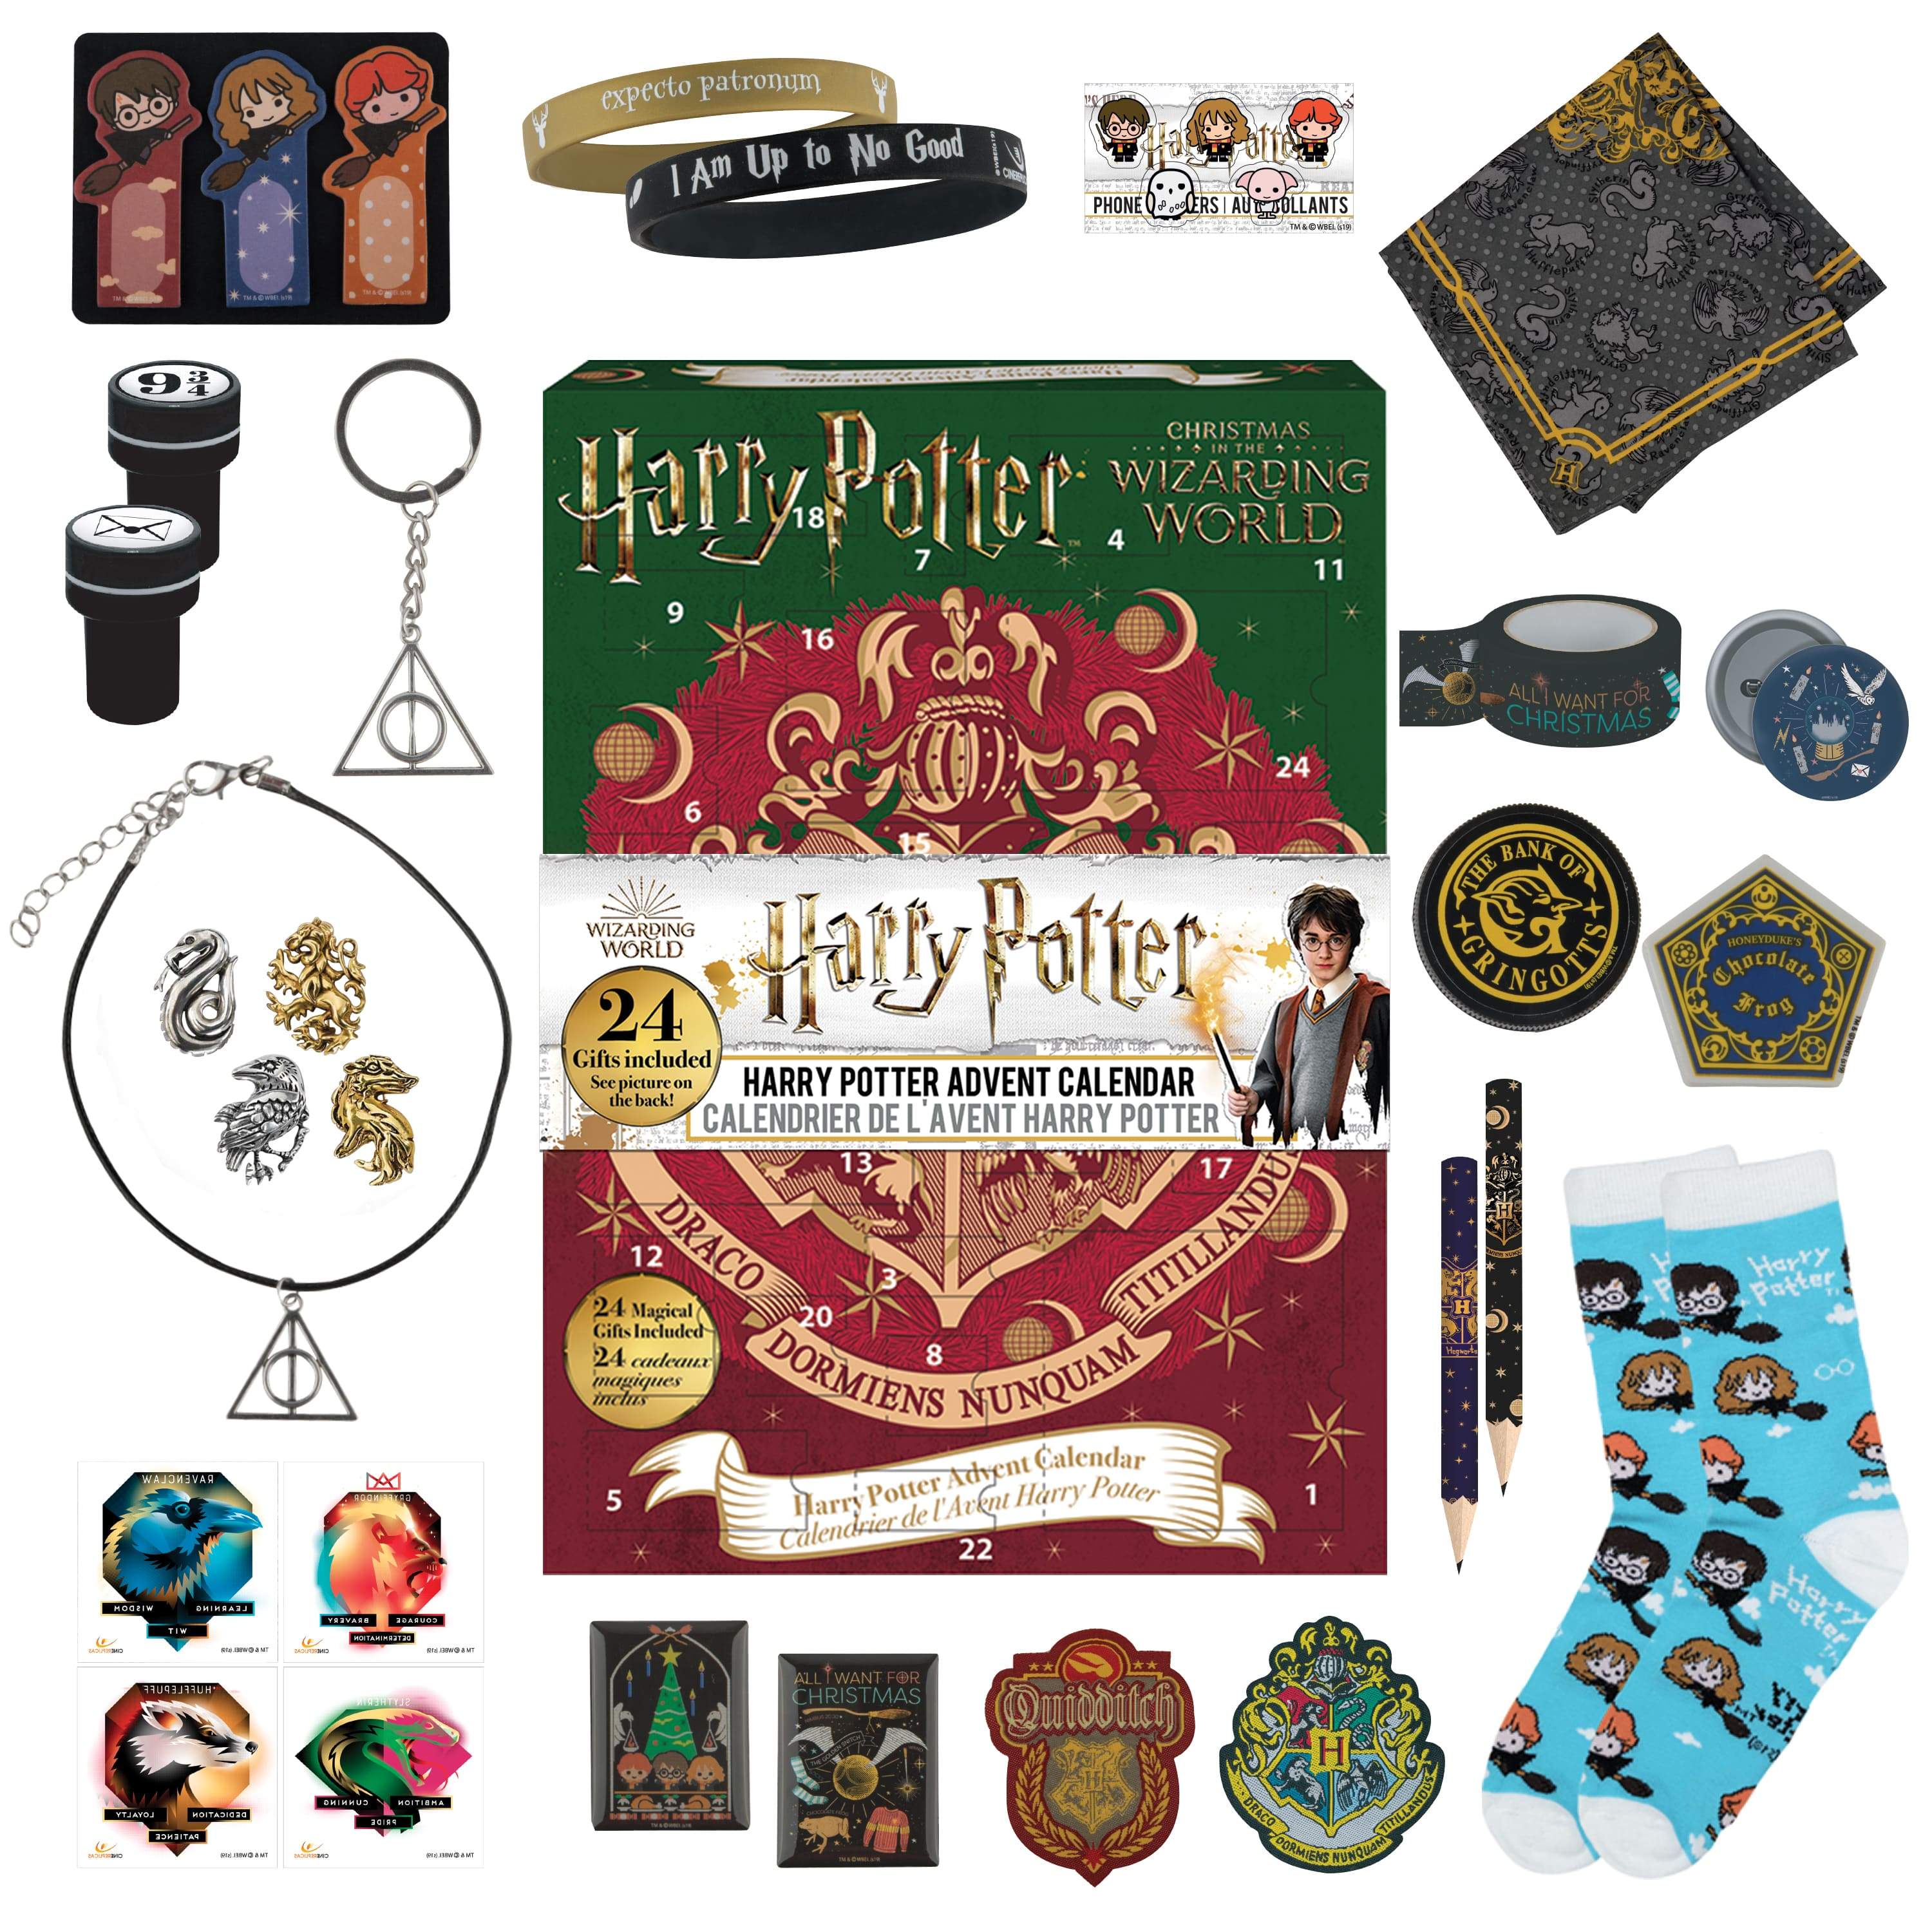 new-harry-potter-advents-are-ready-for-pre-order-cue-the-magic